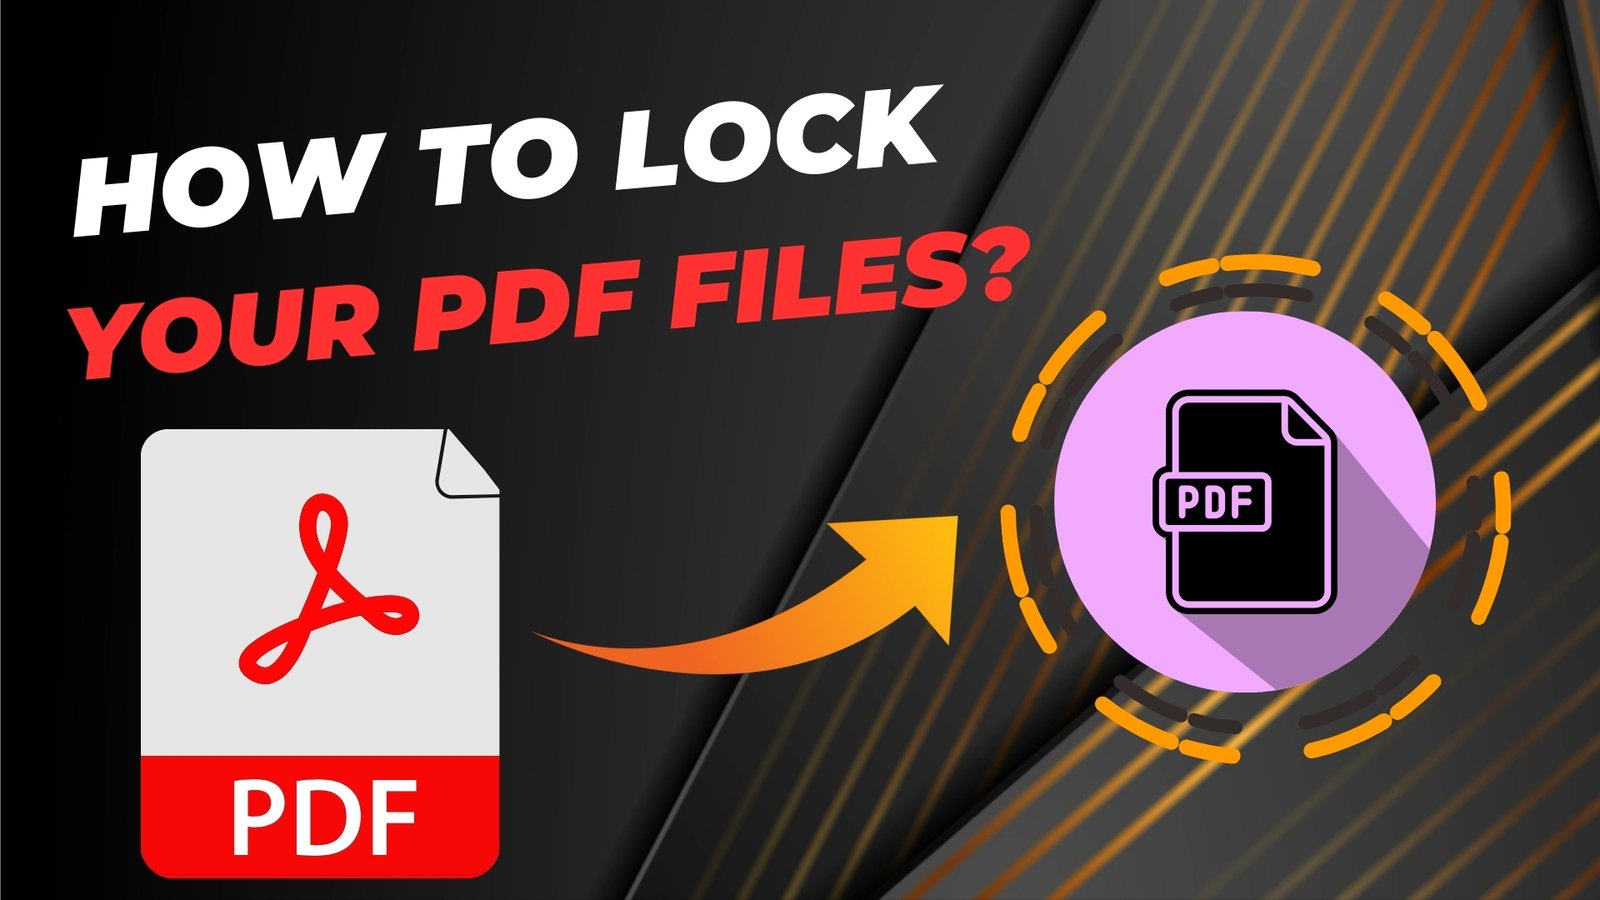 How to lock your PDF files?